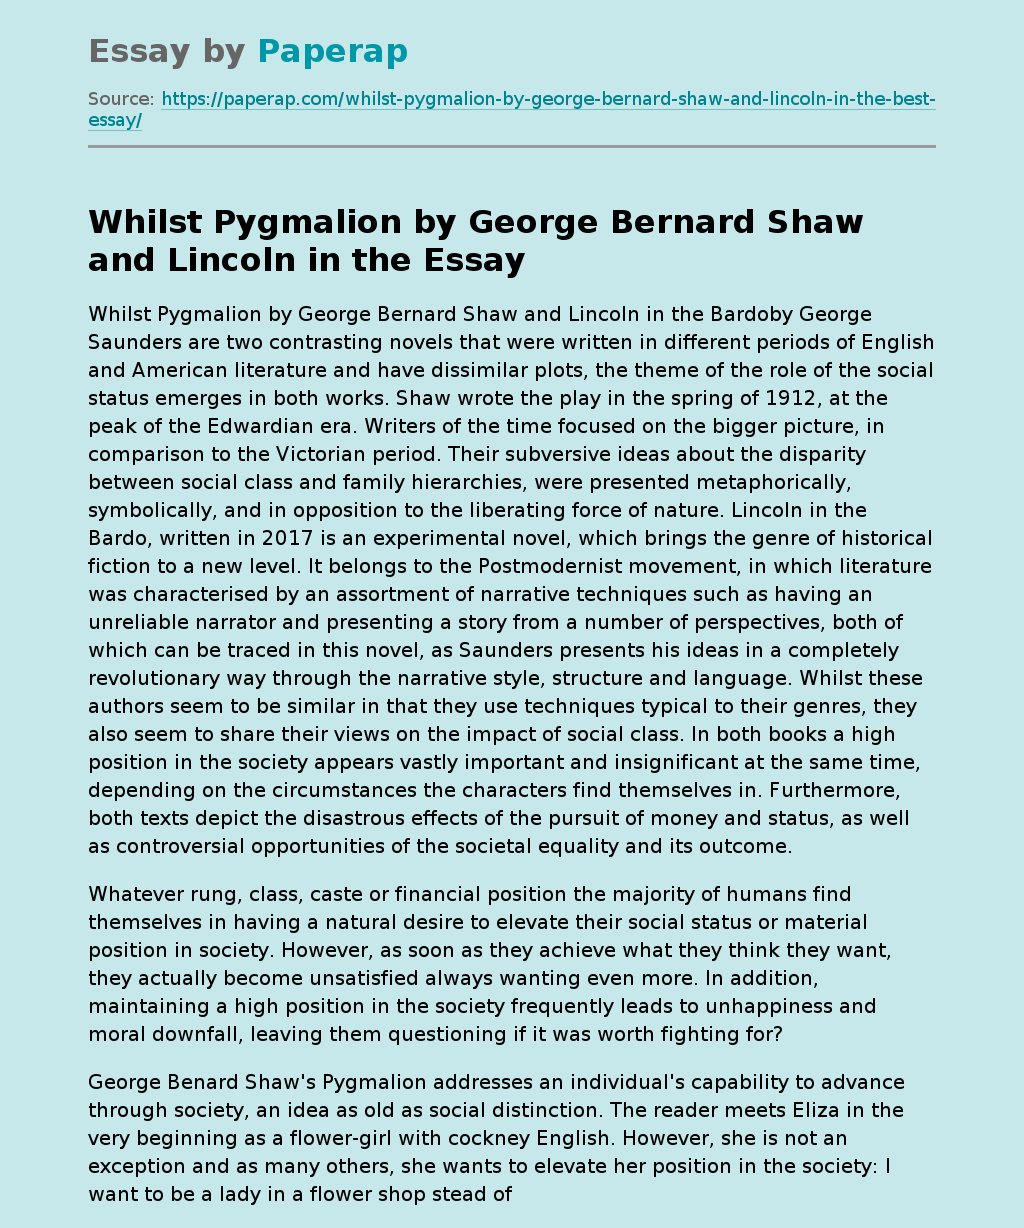 Whilst Pygmalion by George Bernard Shaw and Lincoln in the